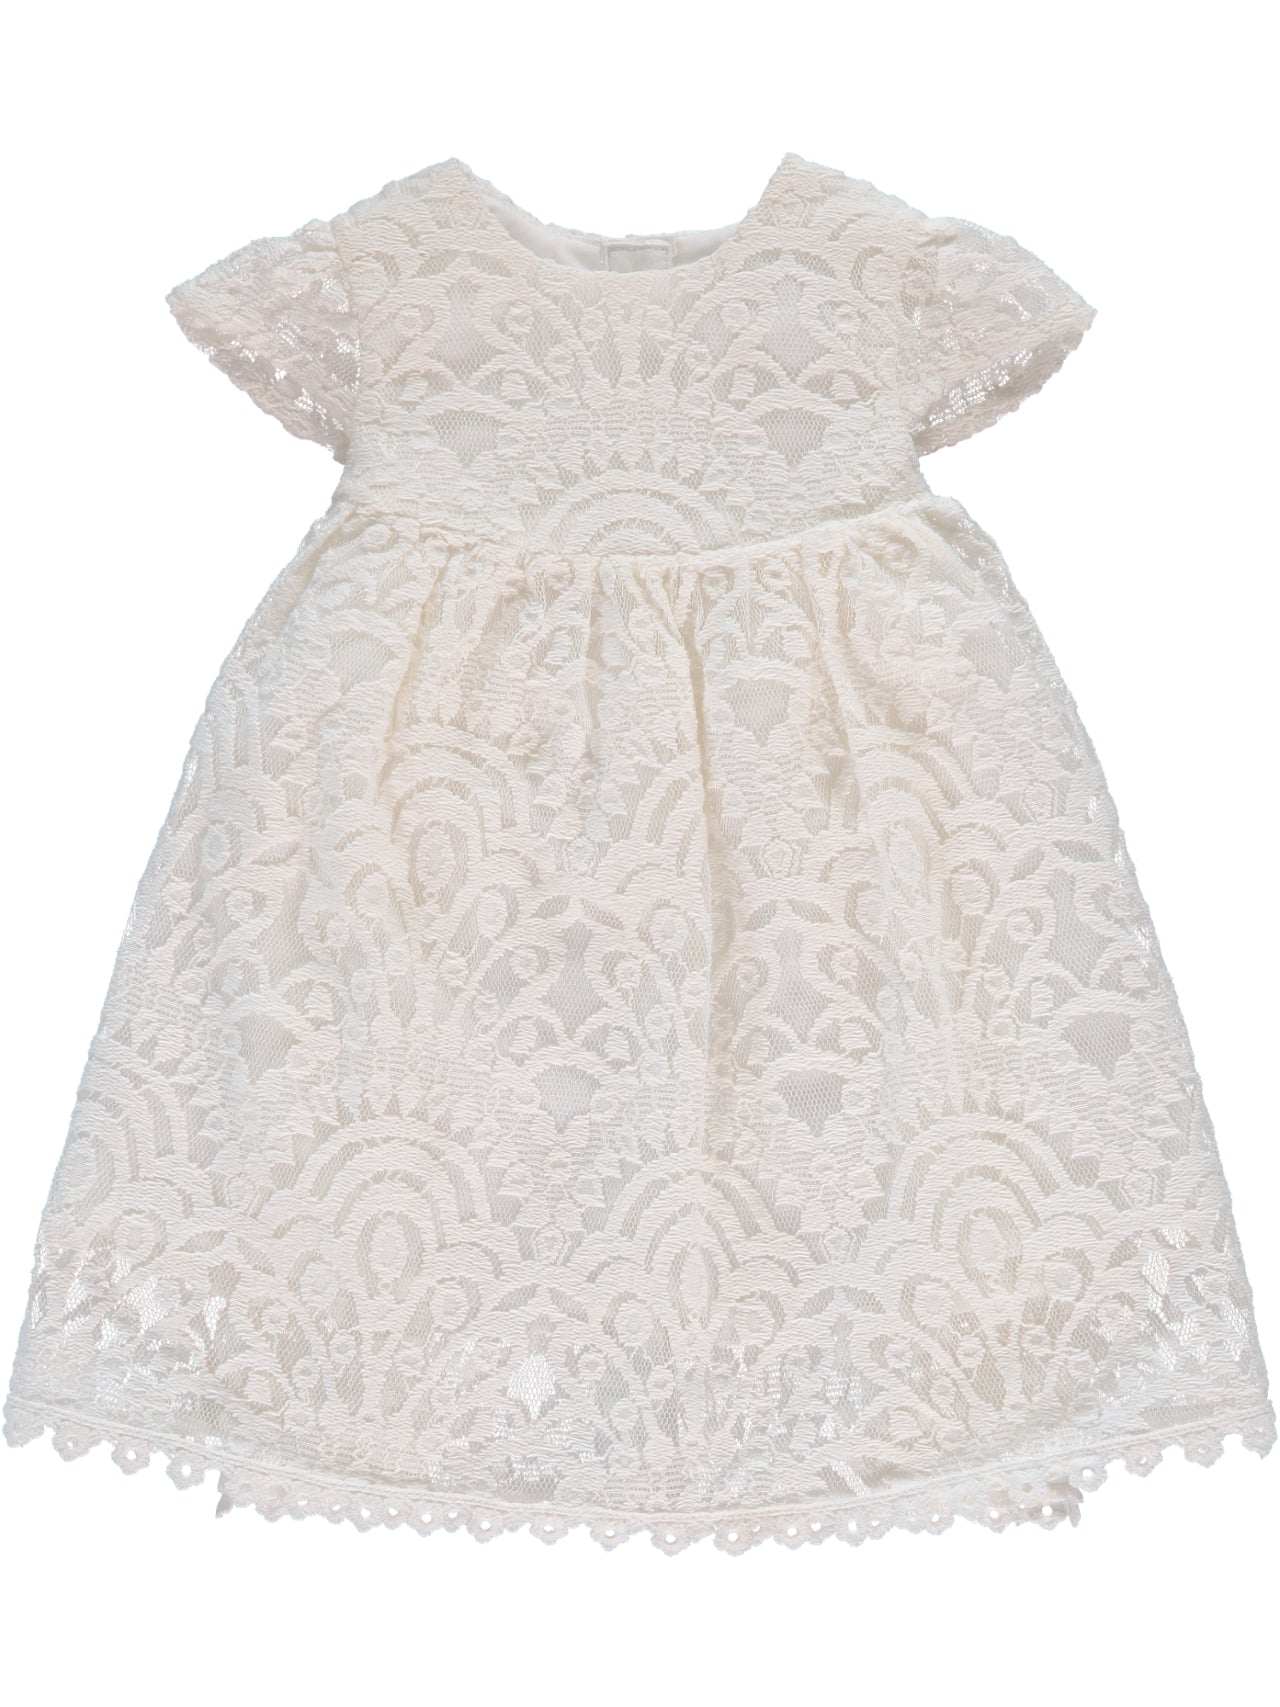 Wholesale Baby Girl Christening Lace Dress with Matching Bonnet 4 - Imagewear